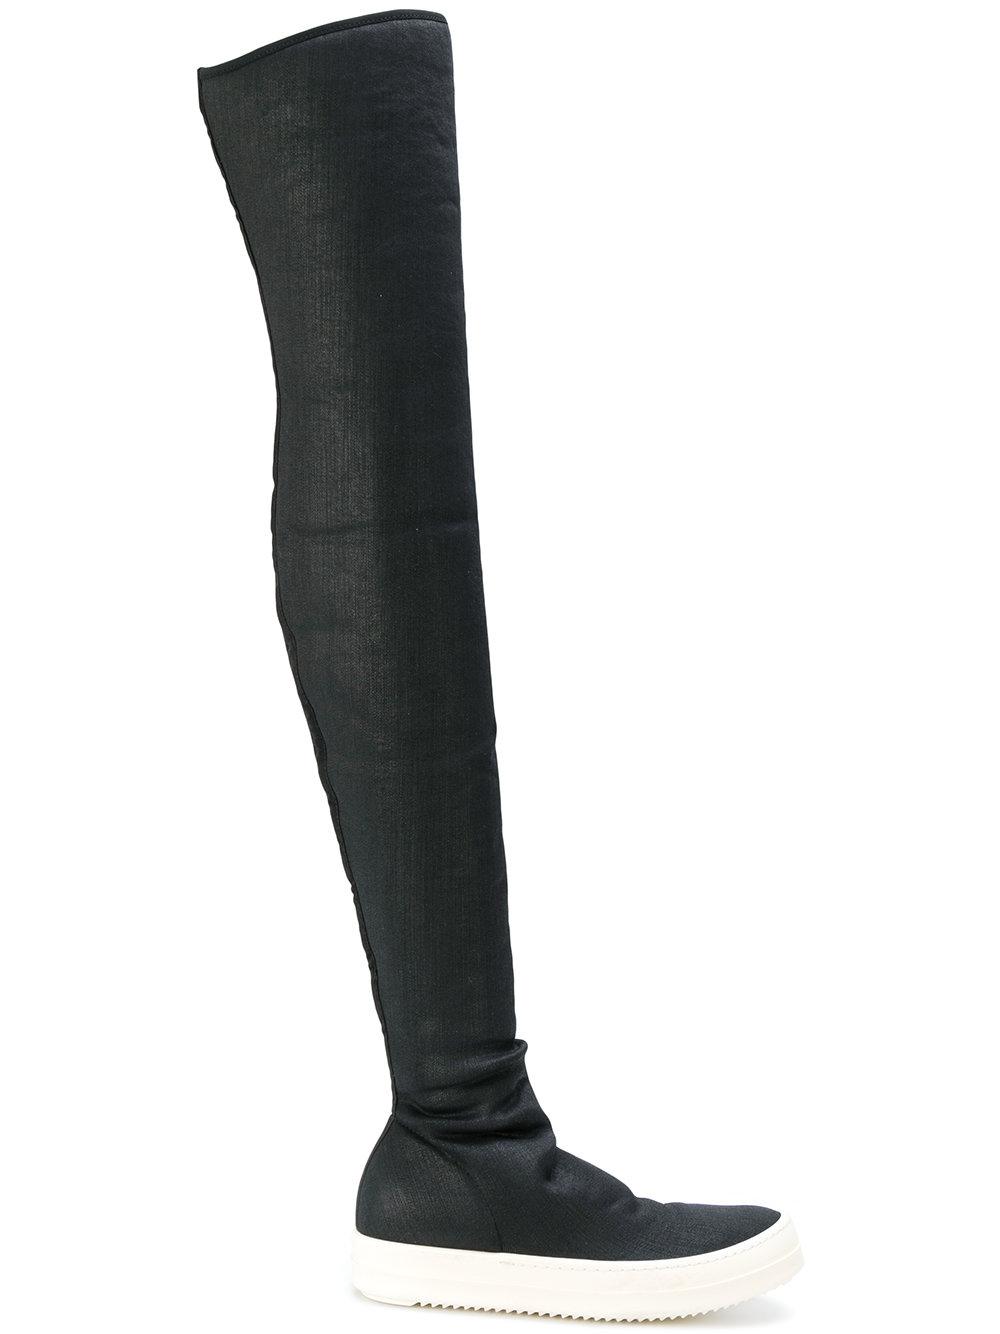 Rick Owens DRKSHDW Sneaker Thigh High Boots in Black | Lyst